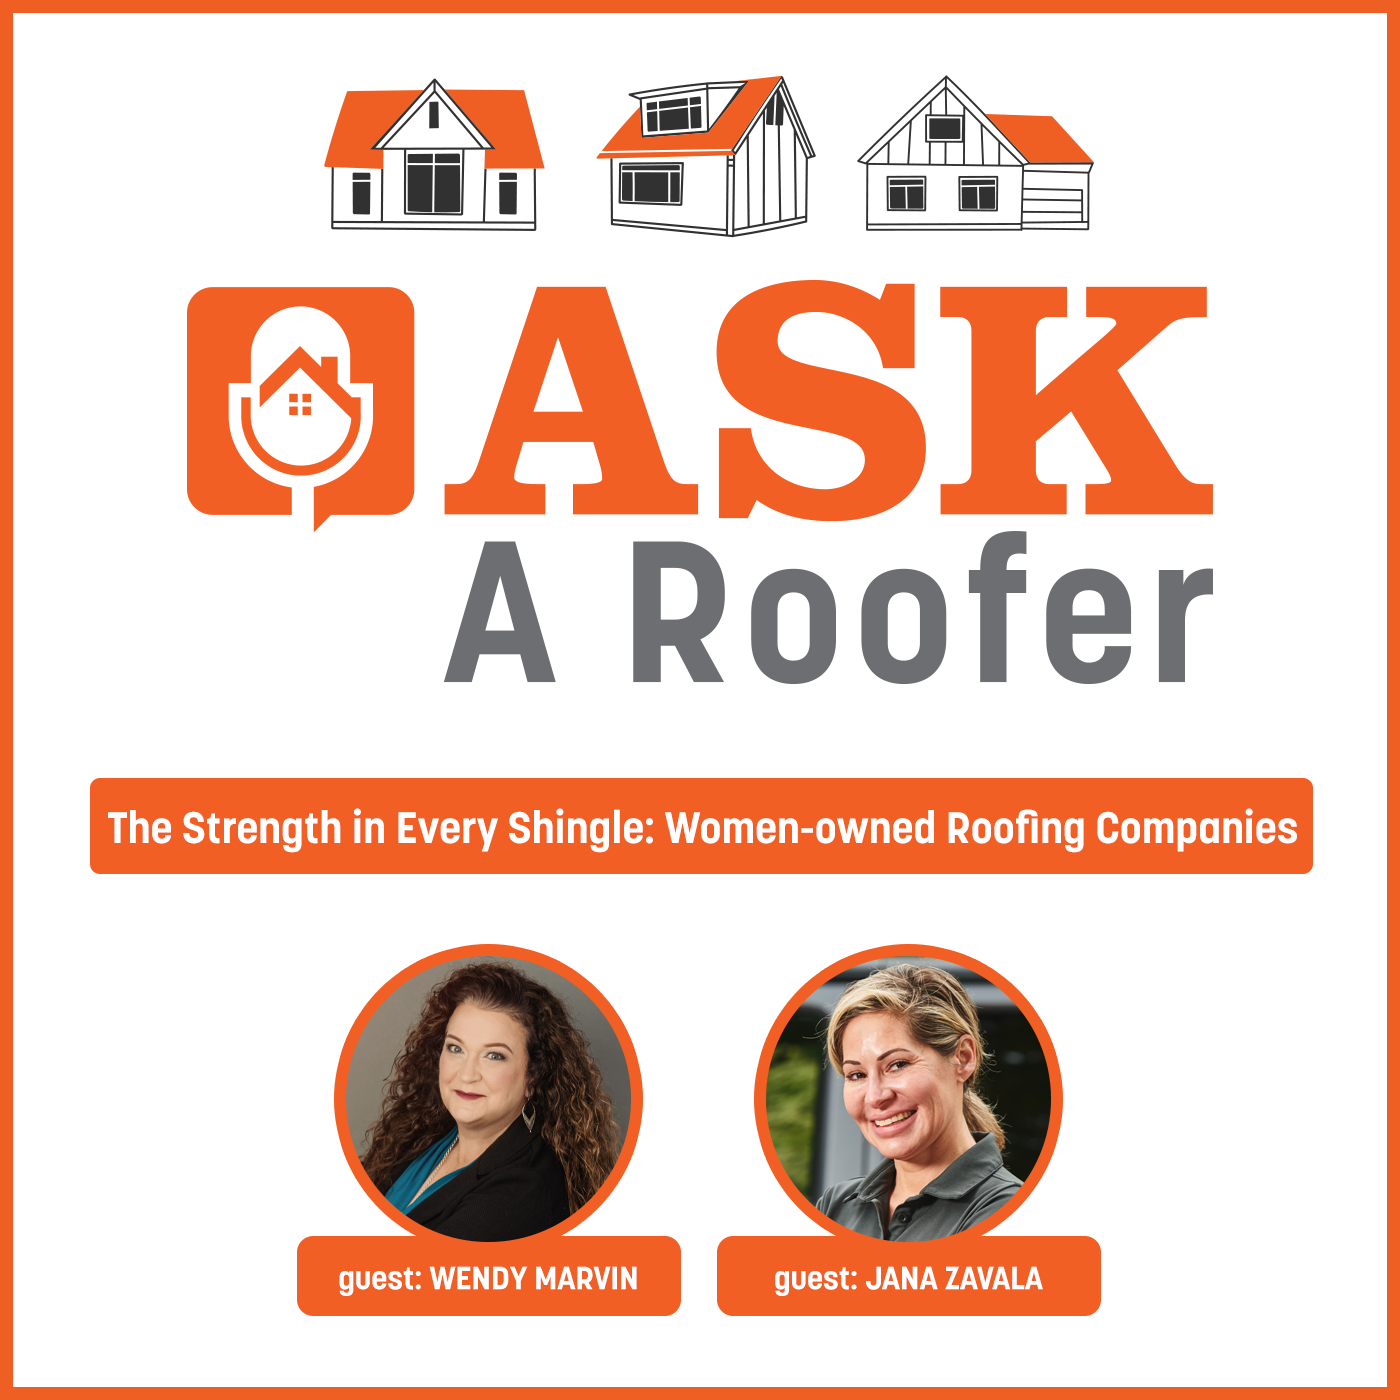 The Strength in Every Shingle: Women-owned Roofing Companies